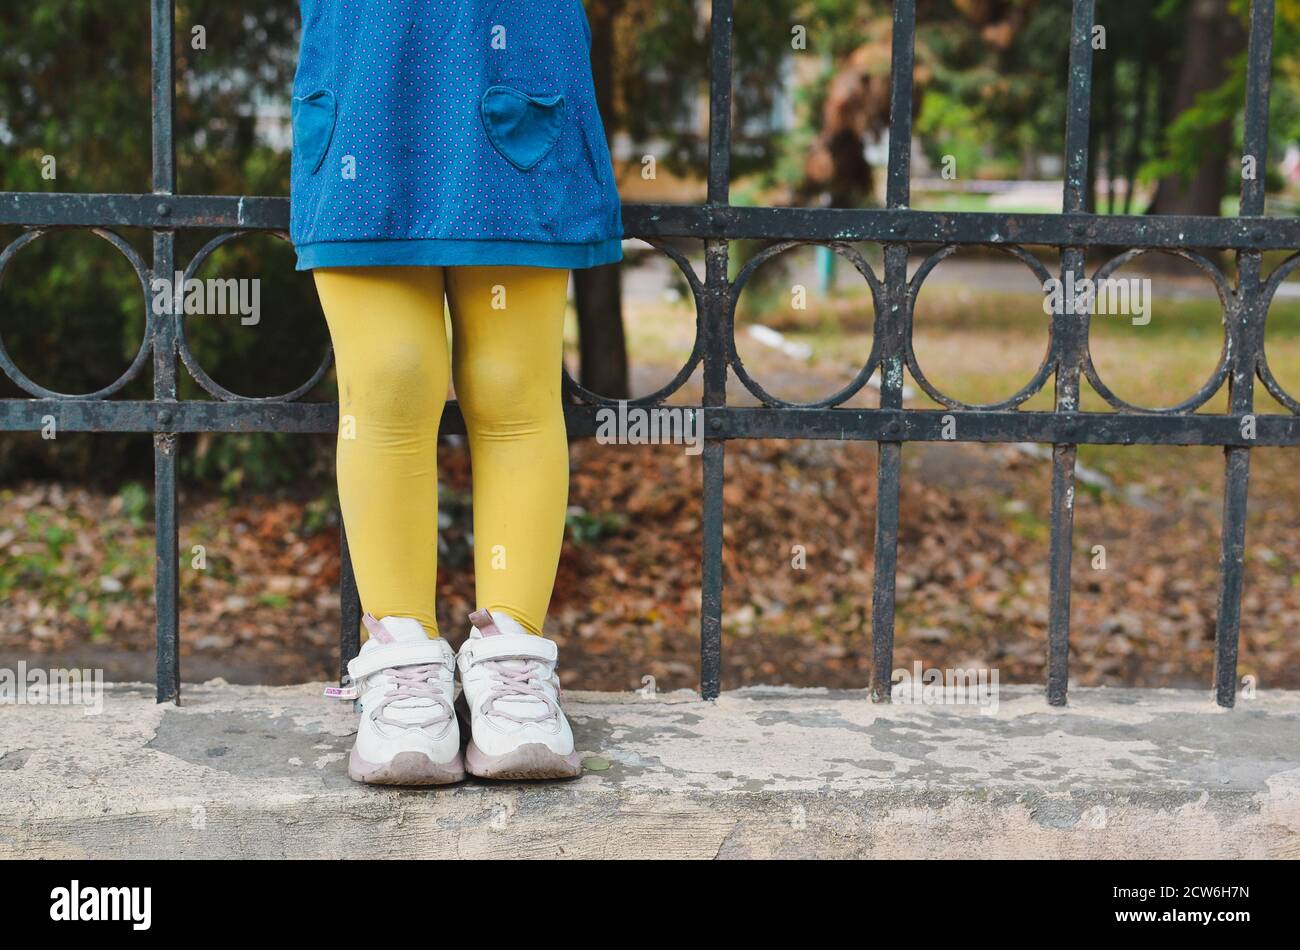 https://c8.alamy.com/comp/2CW6H7N/cute-kids-in-the-autumn-park-childs-feet-yellow-tights-and-a-blue-dress-2CW6H7N.jpg